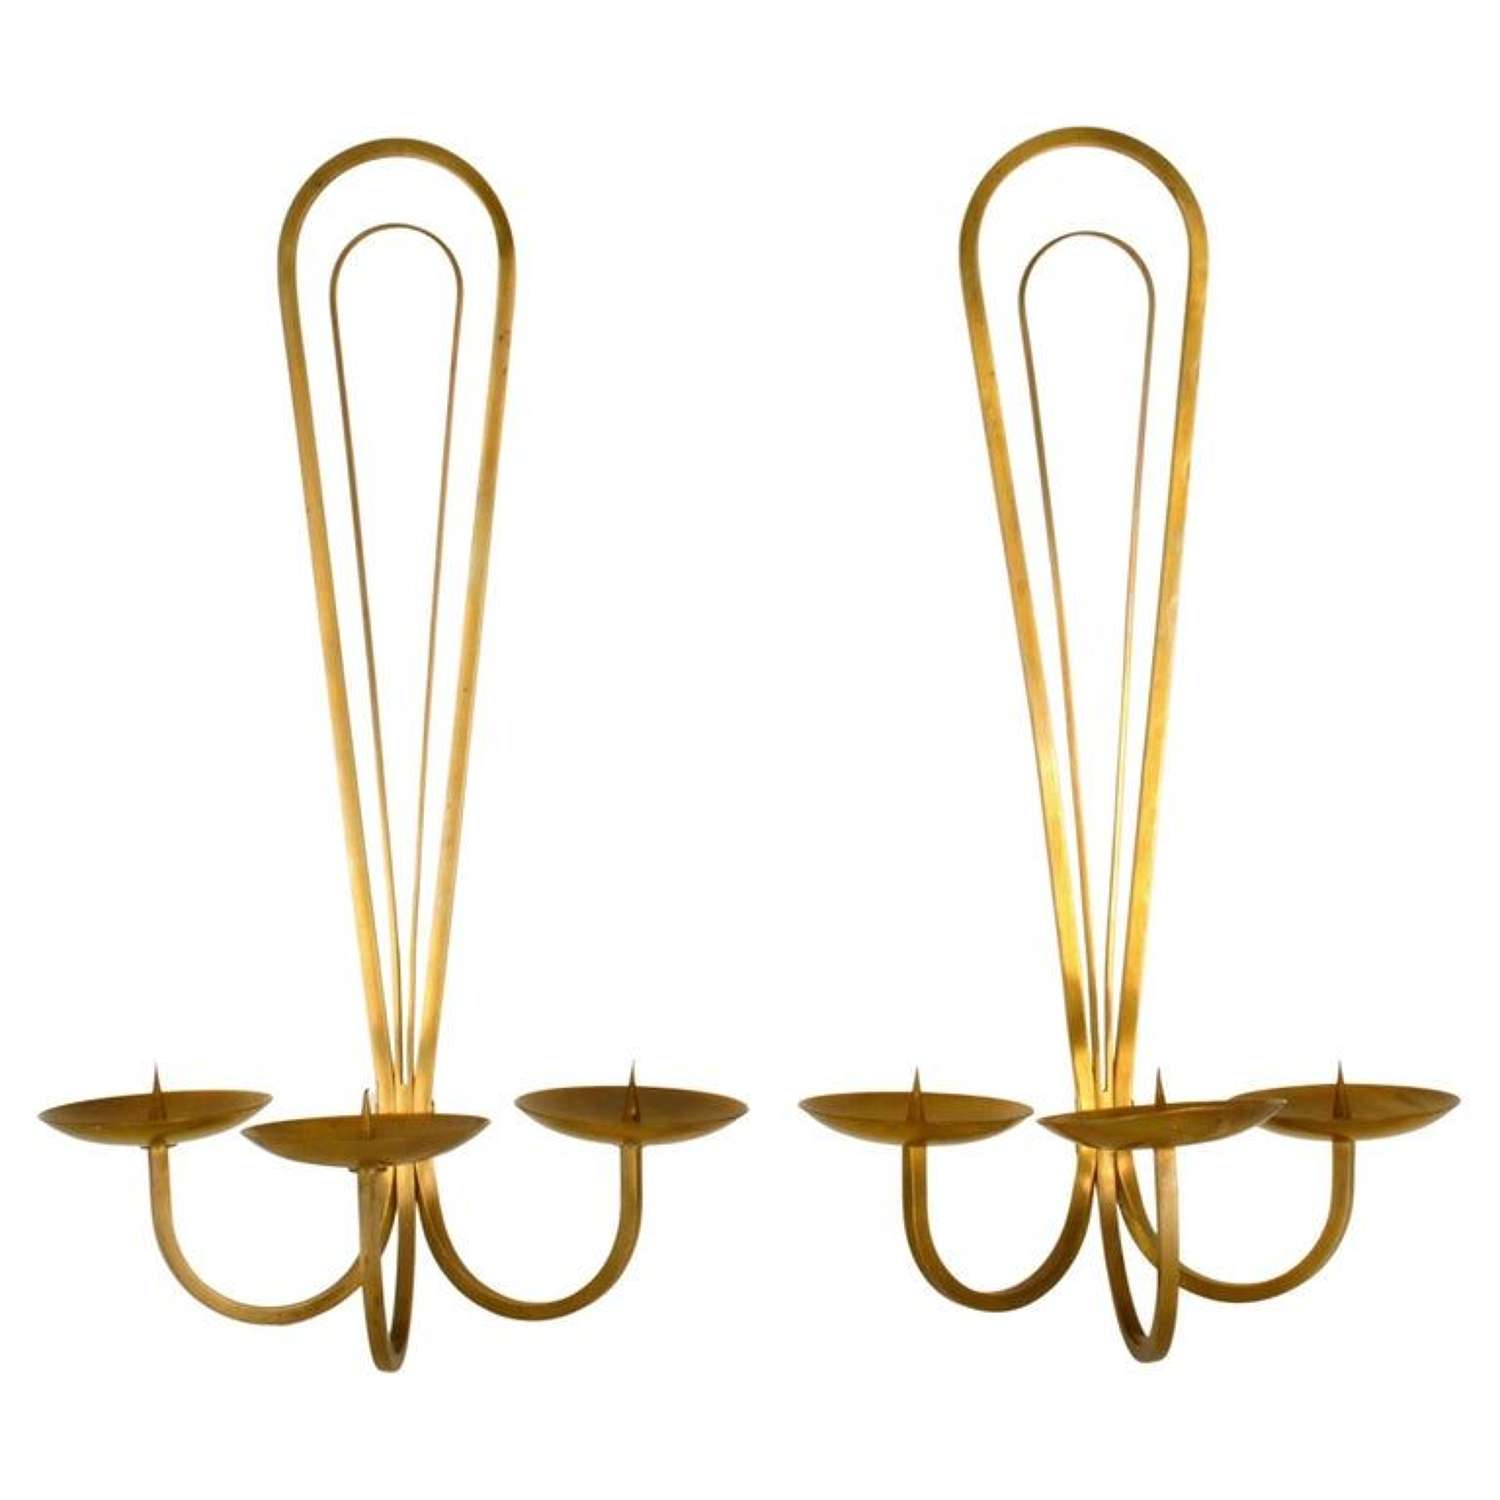 Pair of Candle Sconces for Three Candles in Brass, 1950's